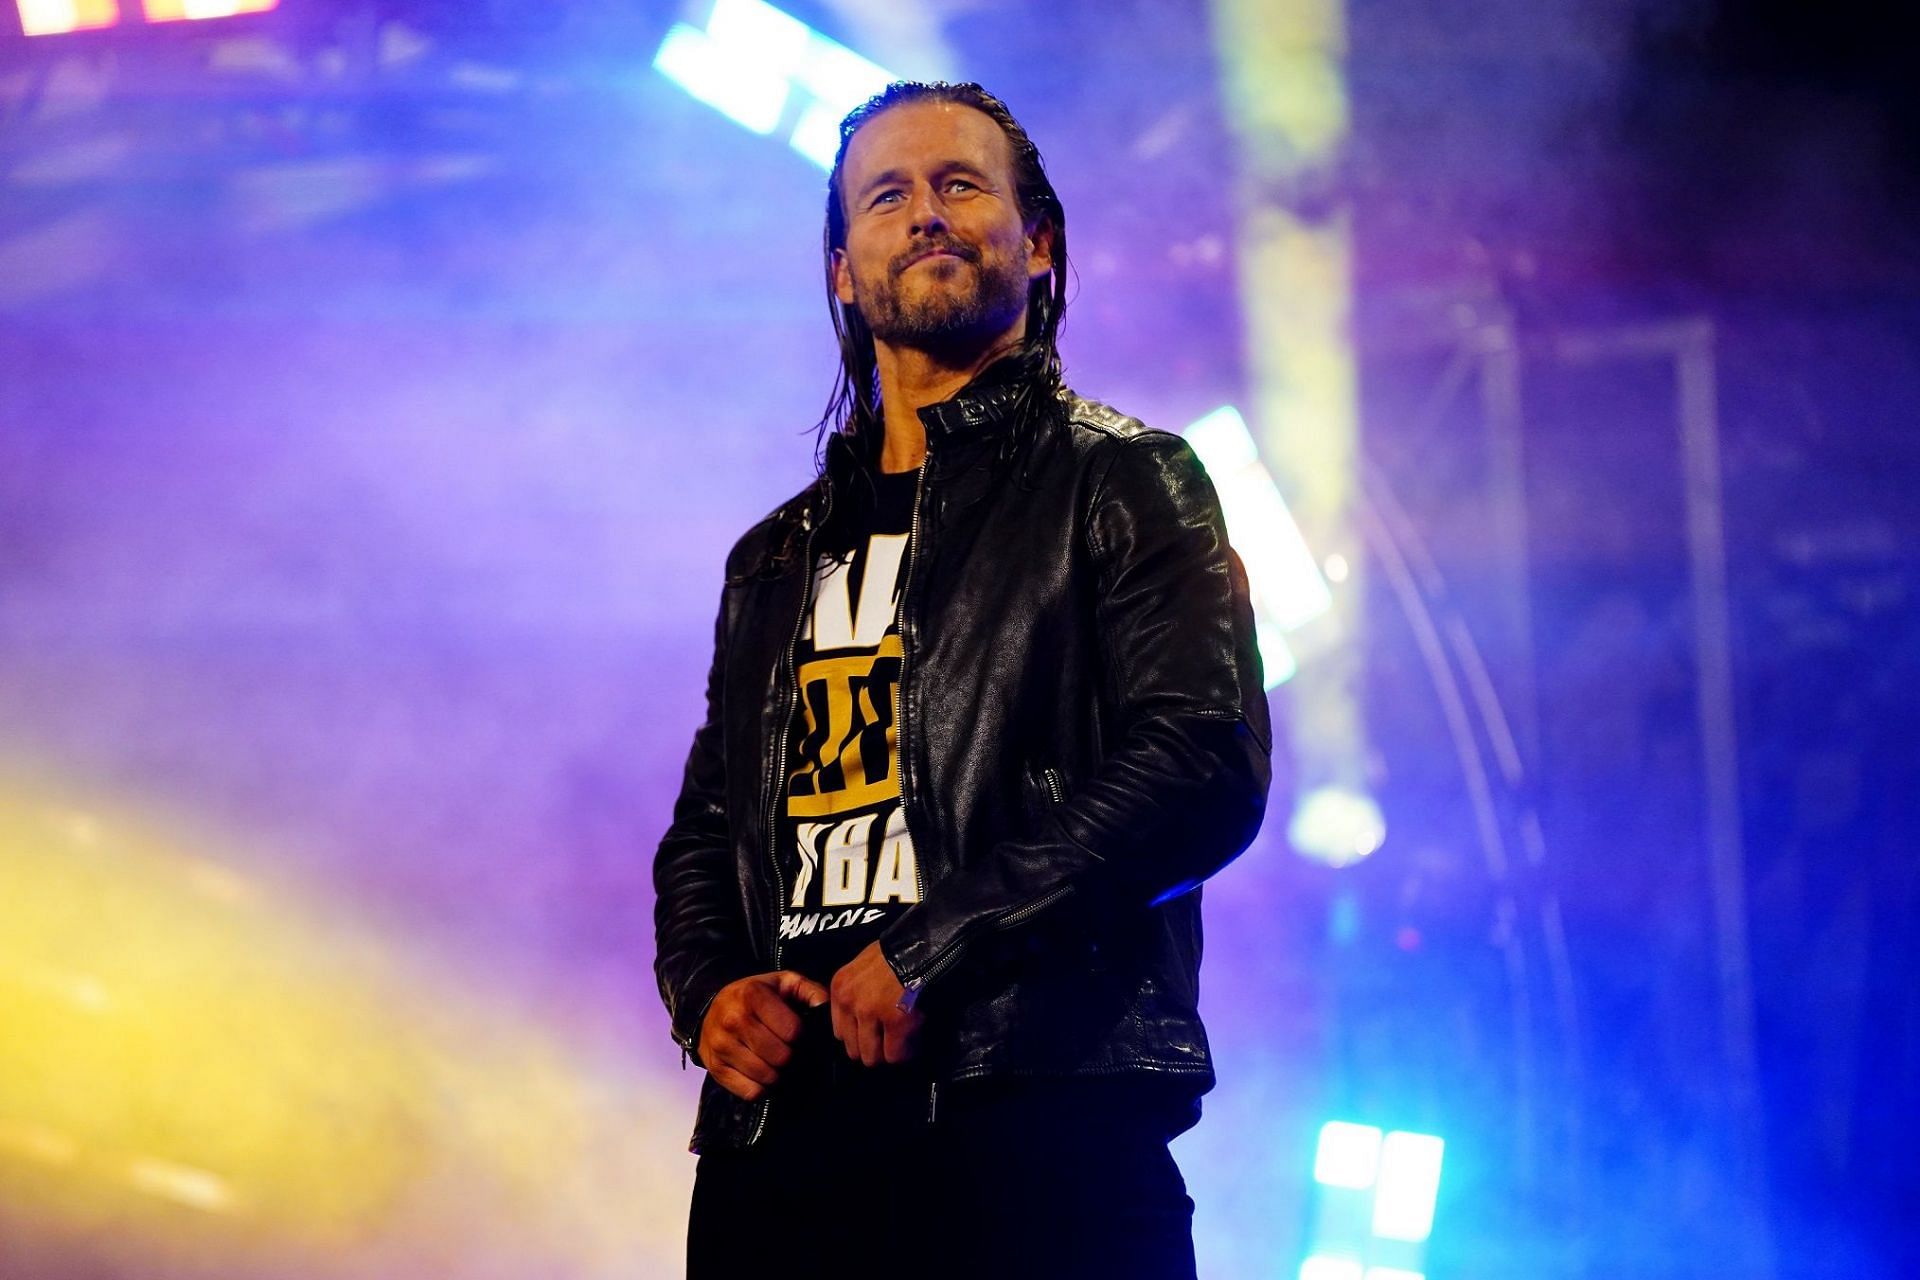 Adam Cole made a small appearance at a North Carolina E-Sport event this weekend.